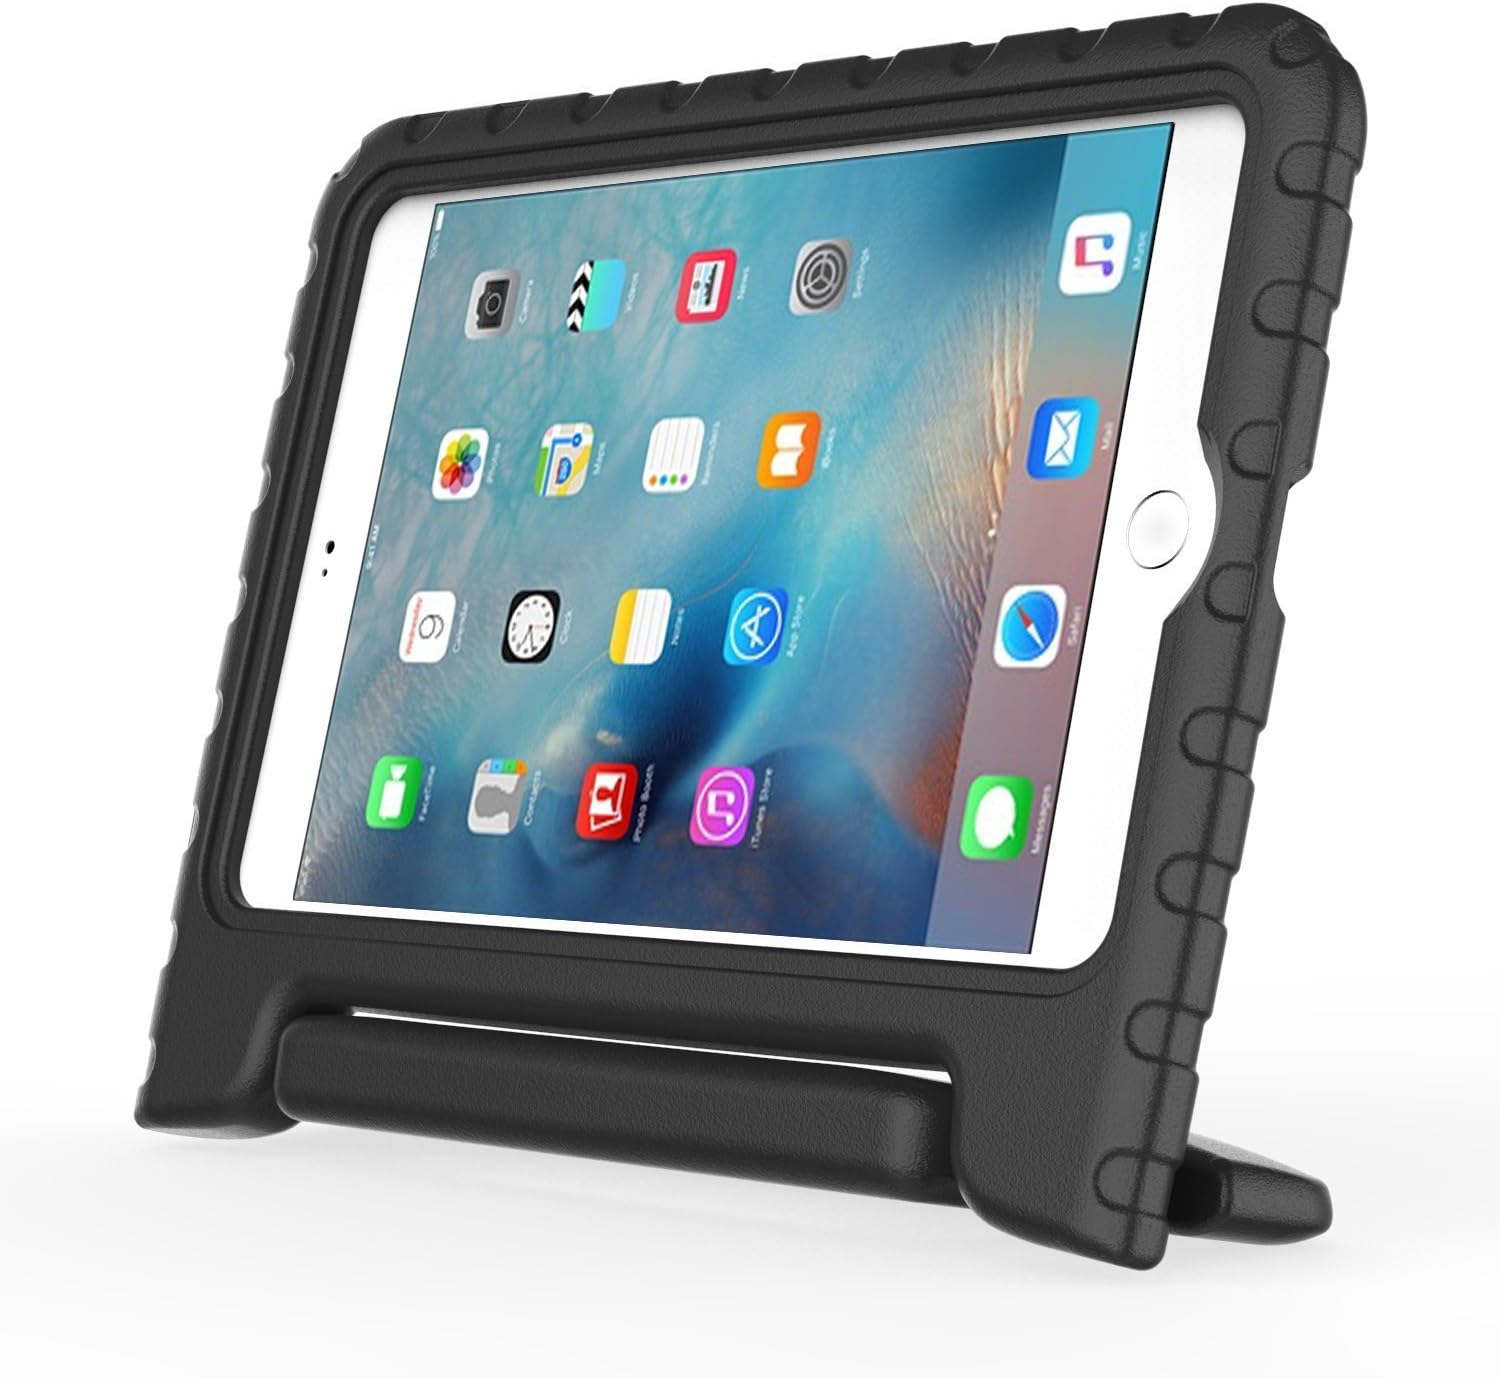 Shockproof Handle case with Stand for iPad Mini 1/2/3/4/5 with 7.9 inch Screen (Black)